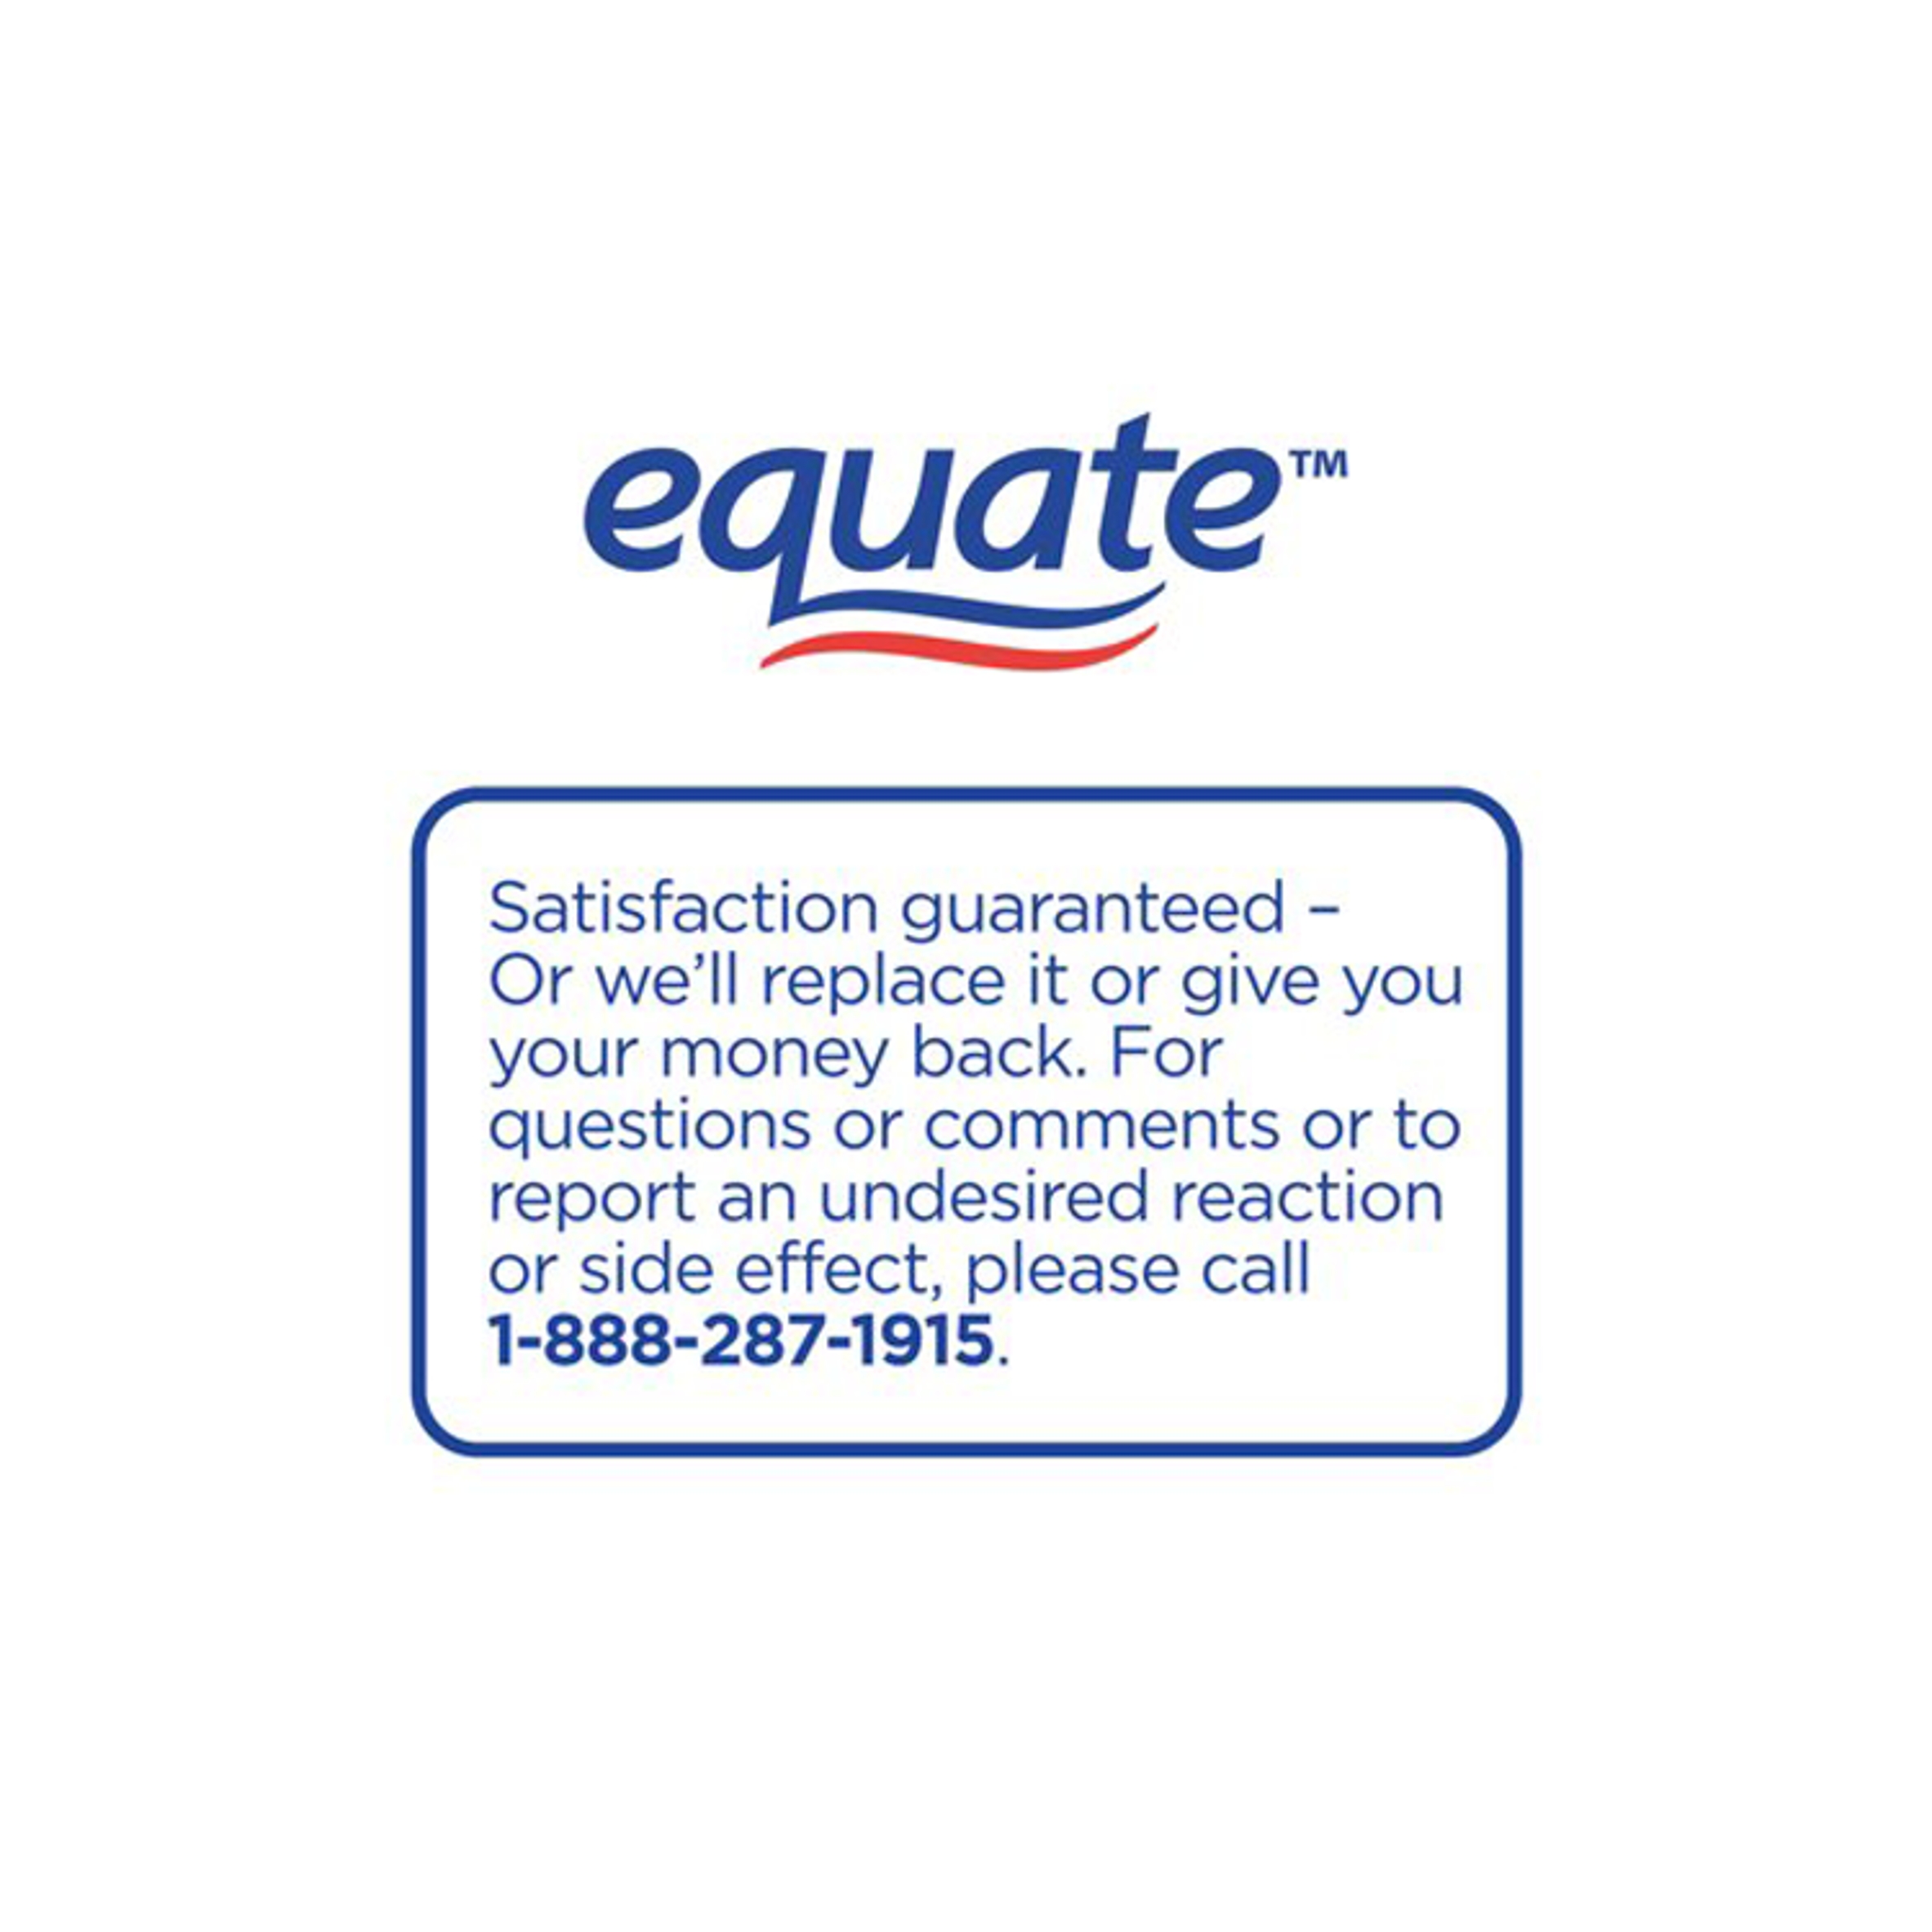 Equate Latex Examination Gloves, 50 Count - image 5 of 10